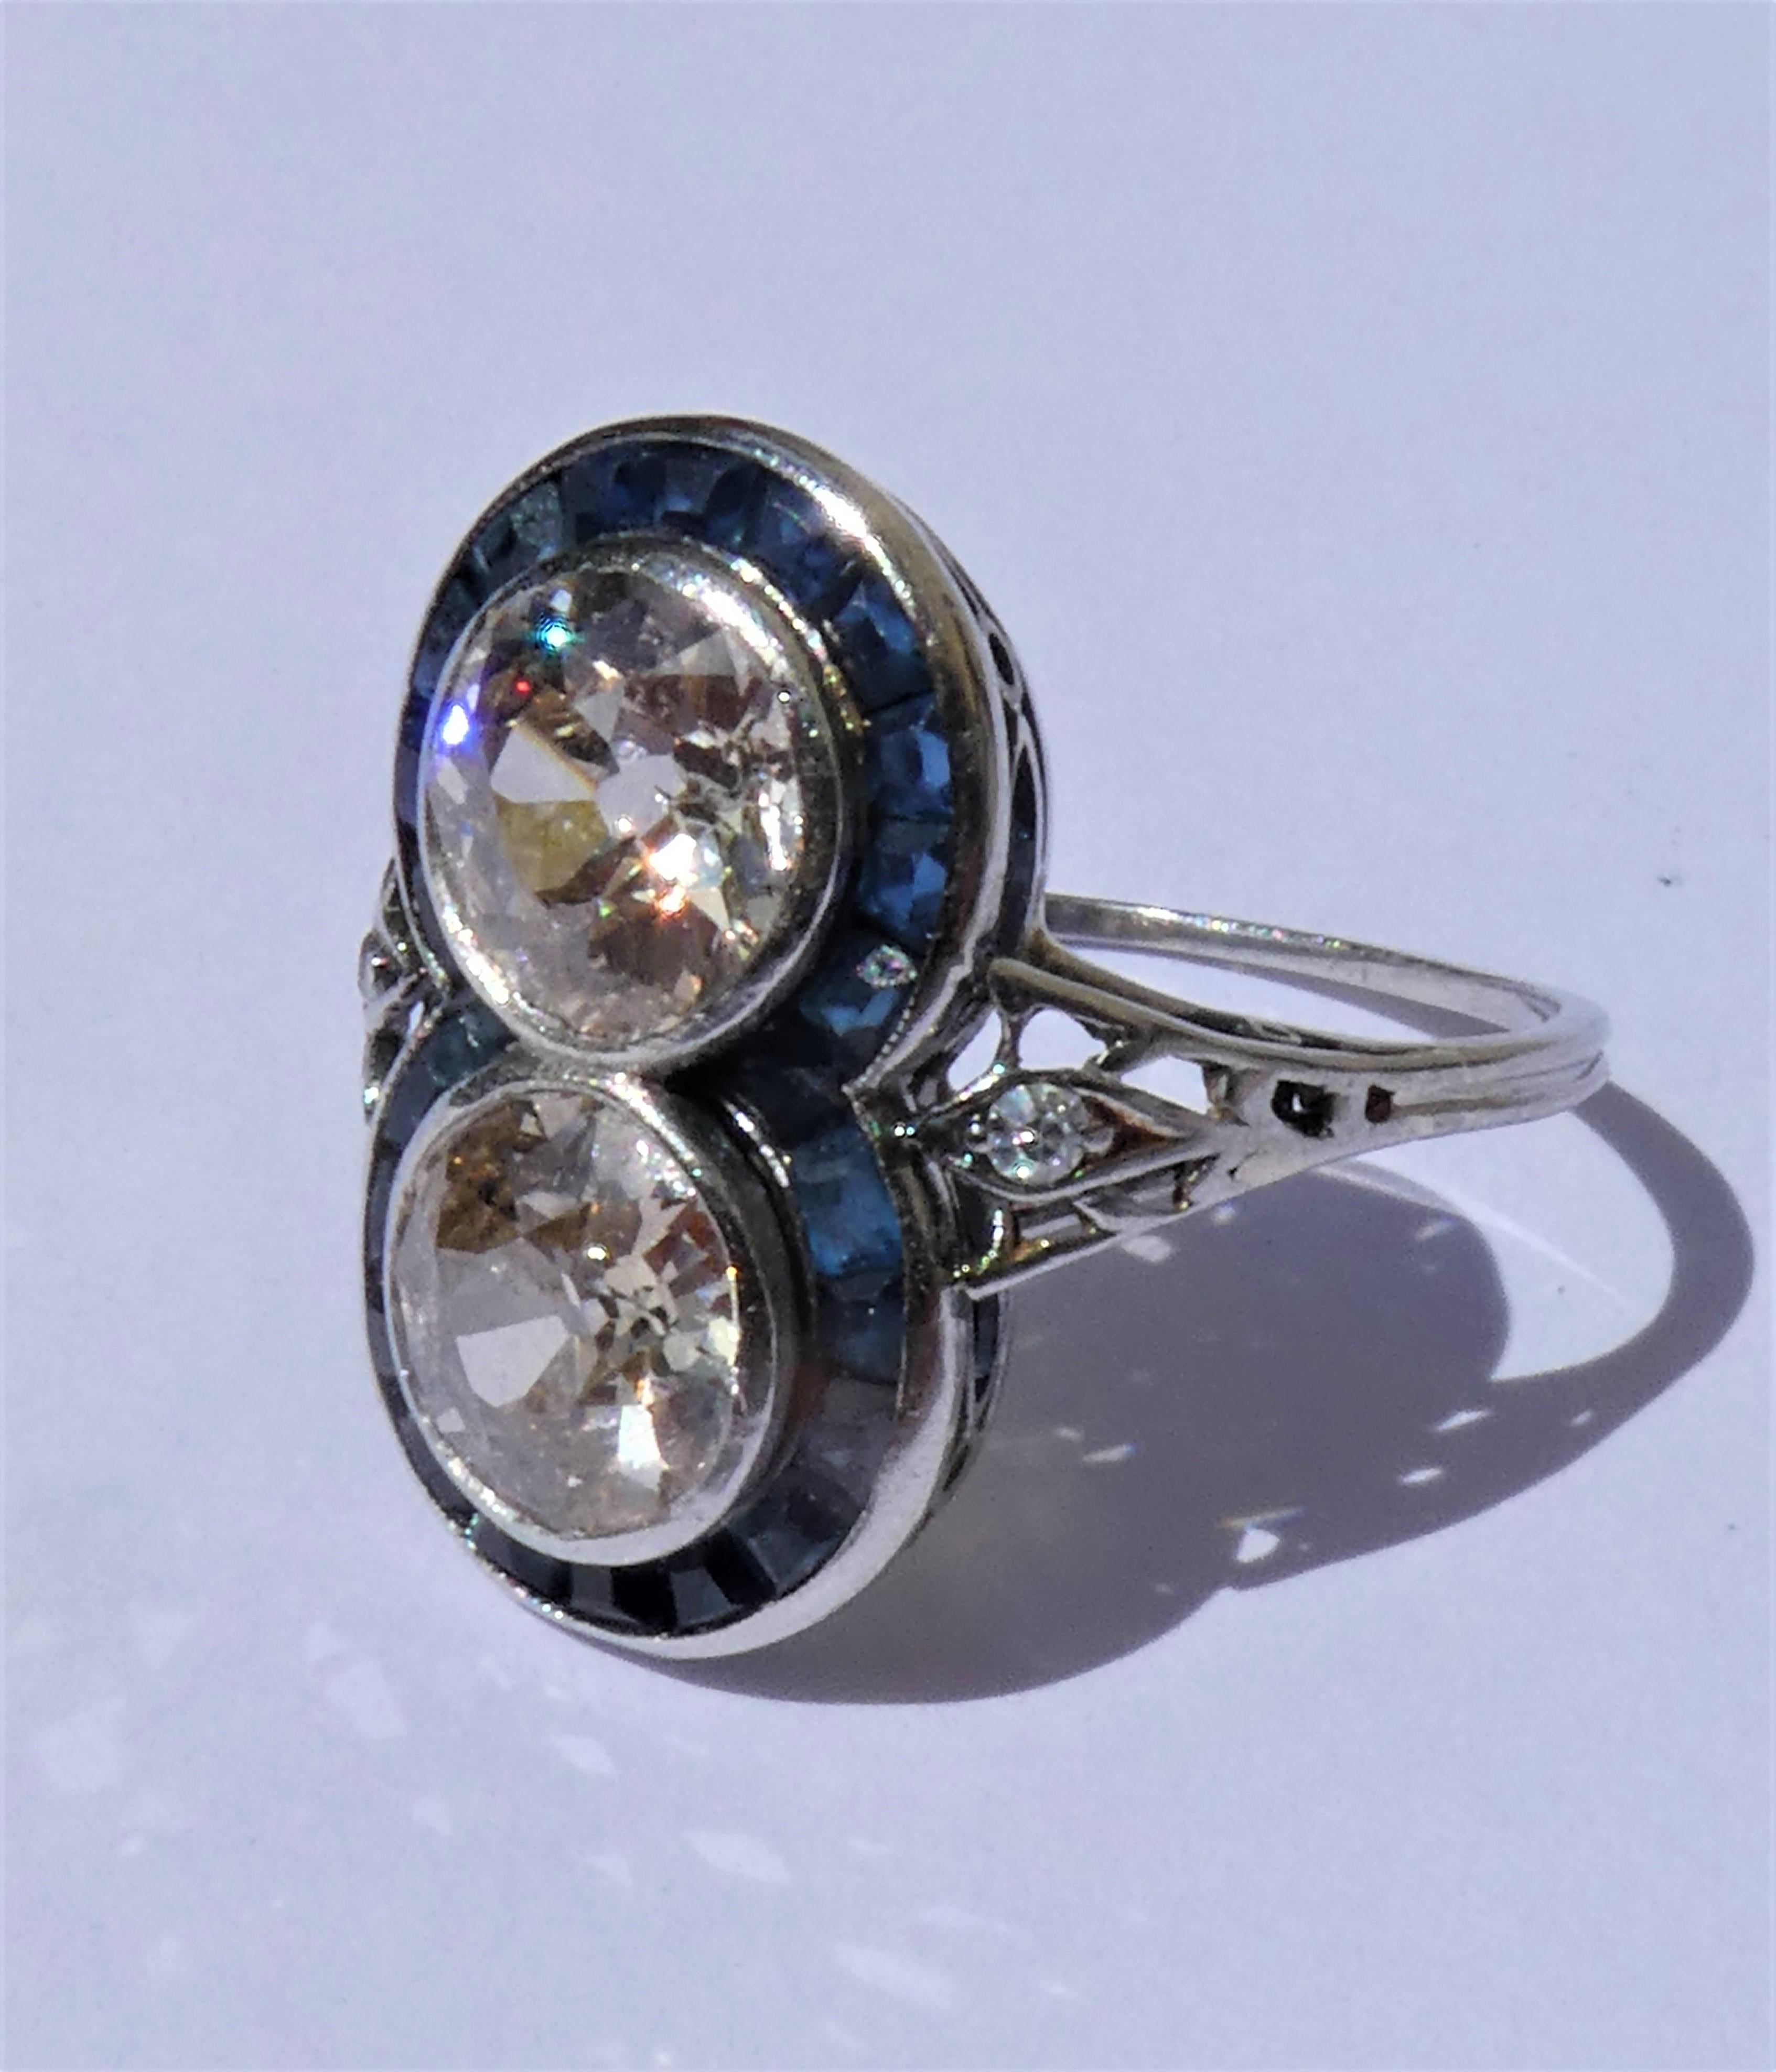 This lovely flat target ring was crafted in platinum in the 1920s. It has a platinum stamp and an Austrian hallmark in the shape of a butterfly. There are two round old European cut diamonds of circa 1.1 carat each, J - K colour, vvs1 - vvs2,